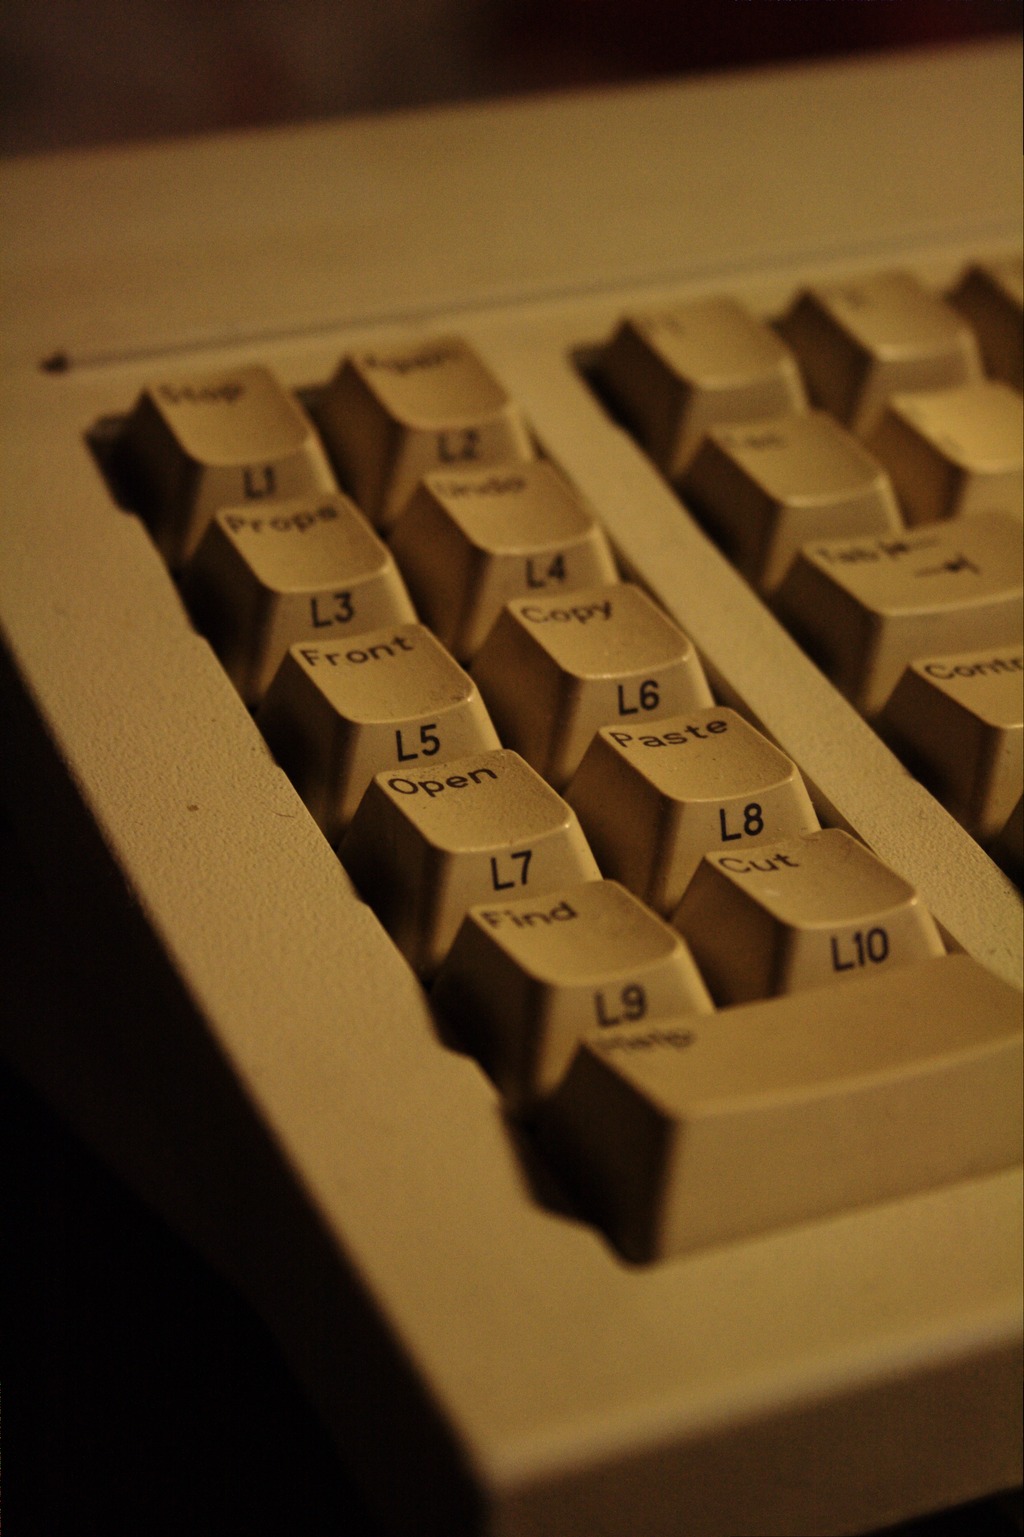 The now-traditional &quot;Sun keys&quot; on the left, with the front labels calling back to the previous Type 3.